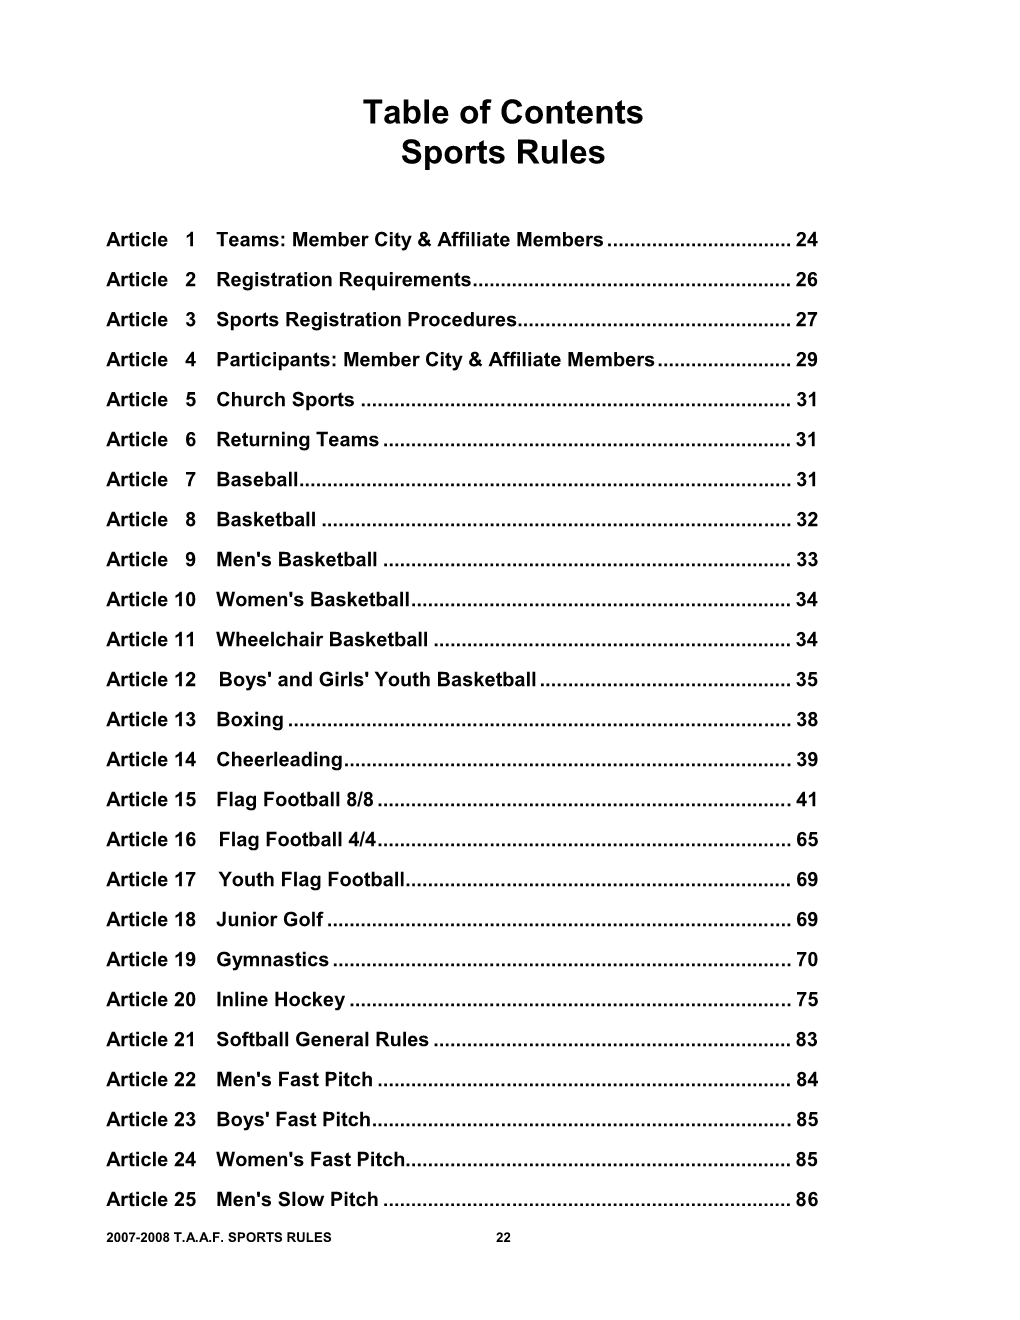 Table of Contents Sports Rules